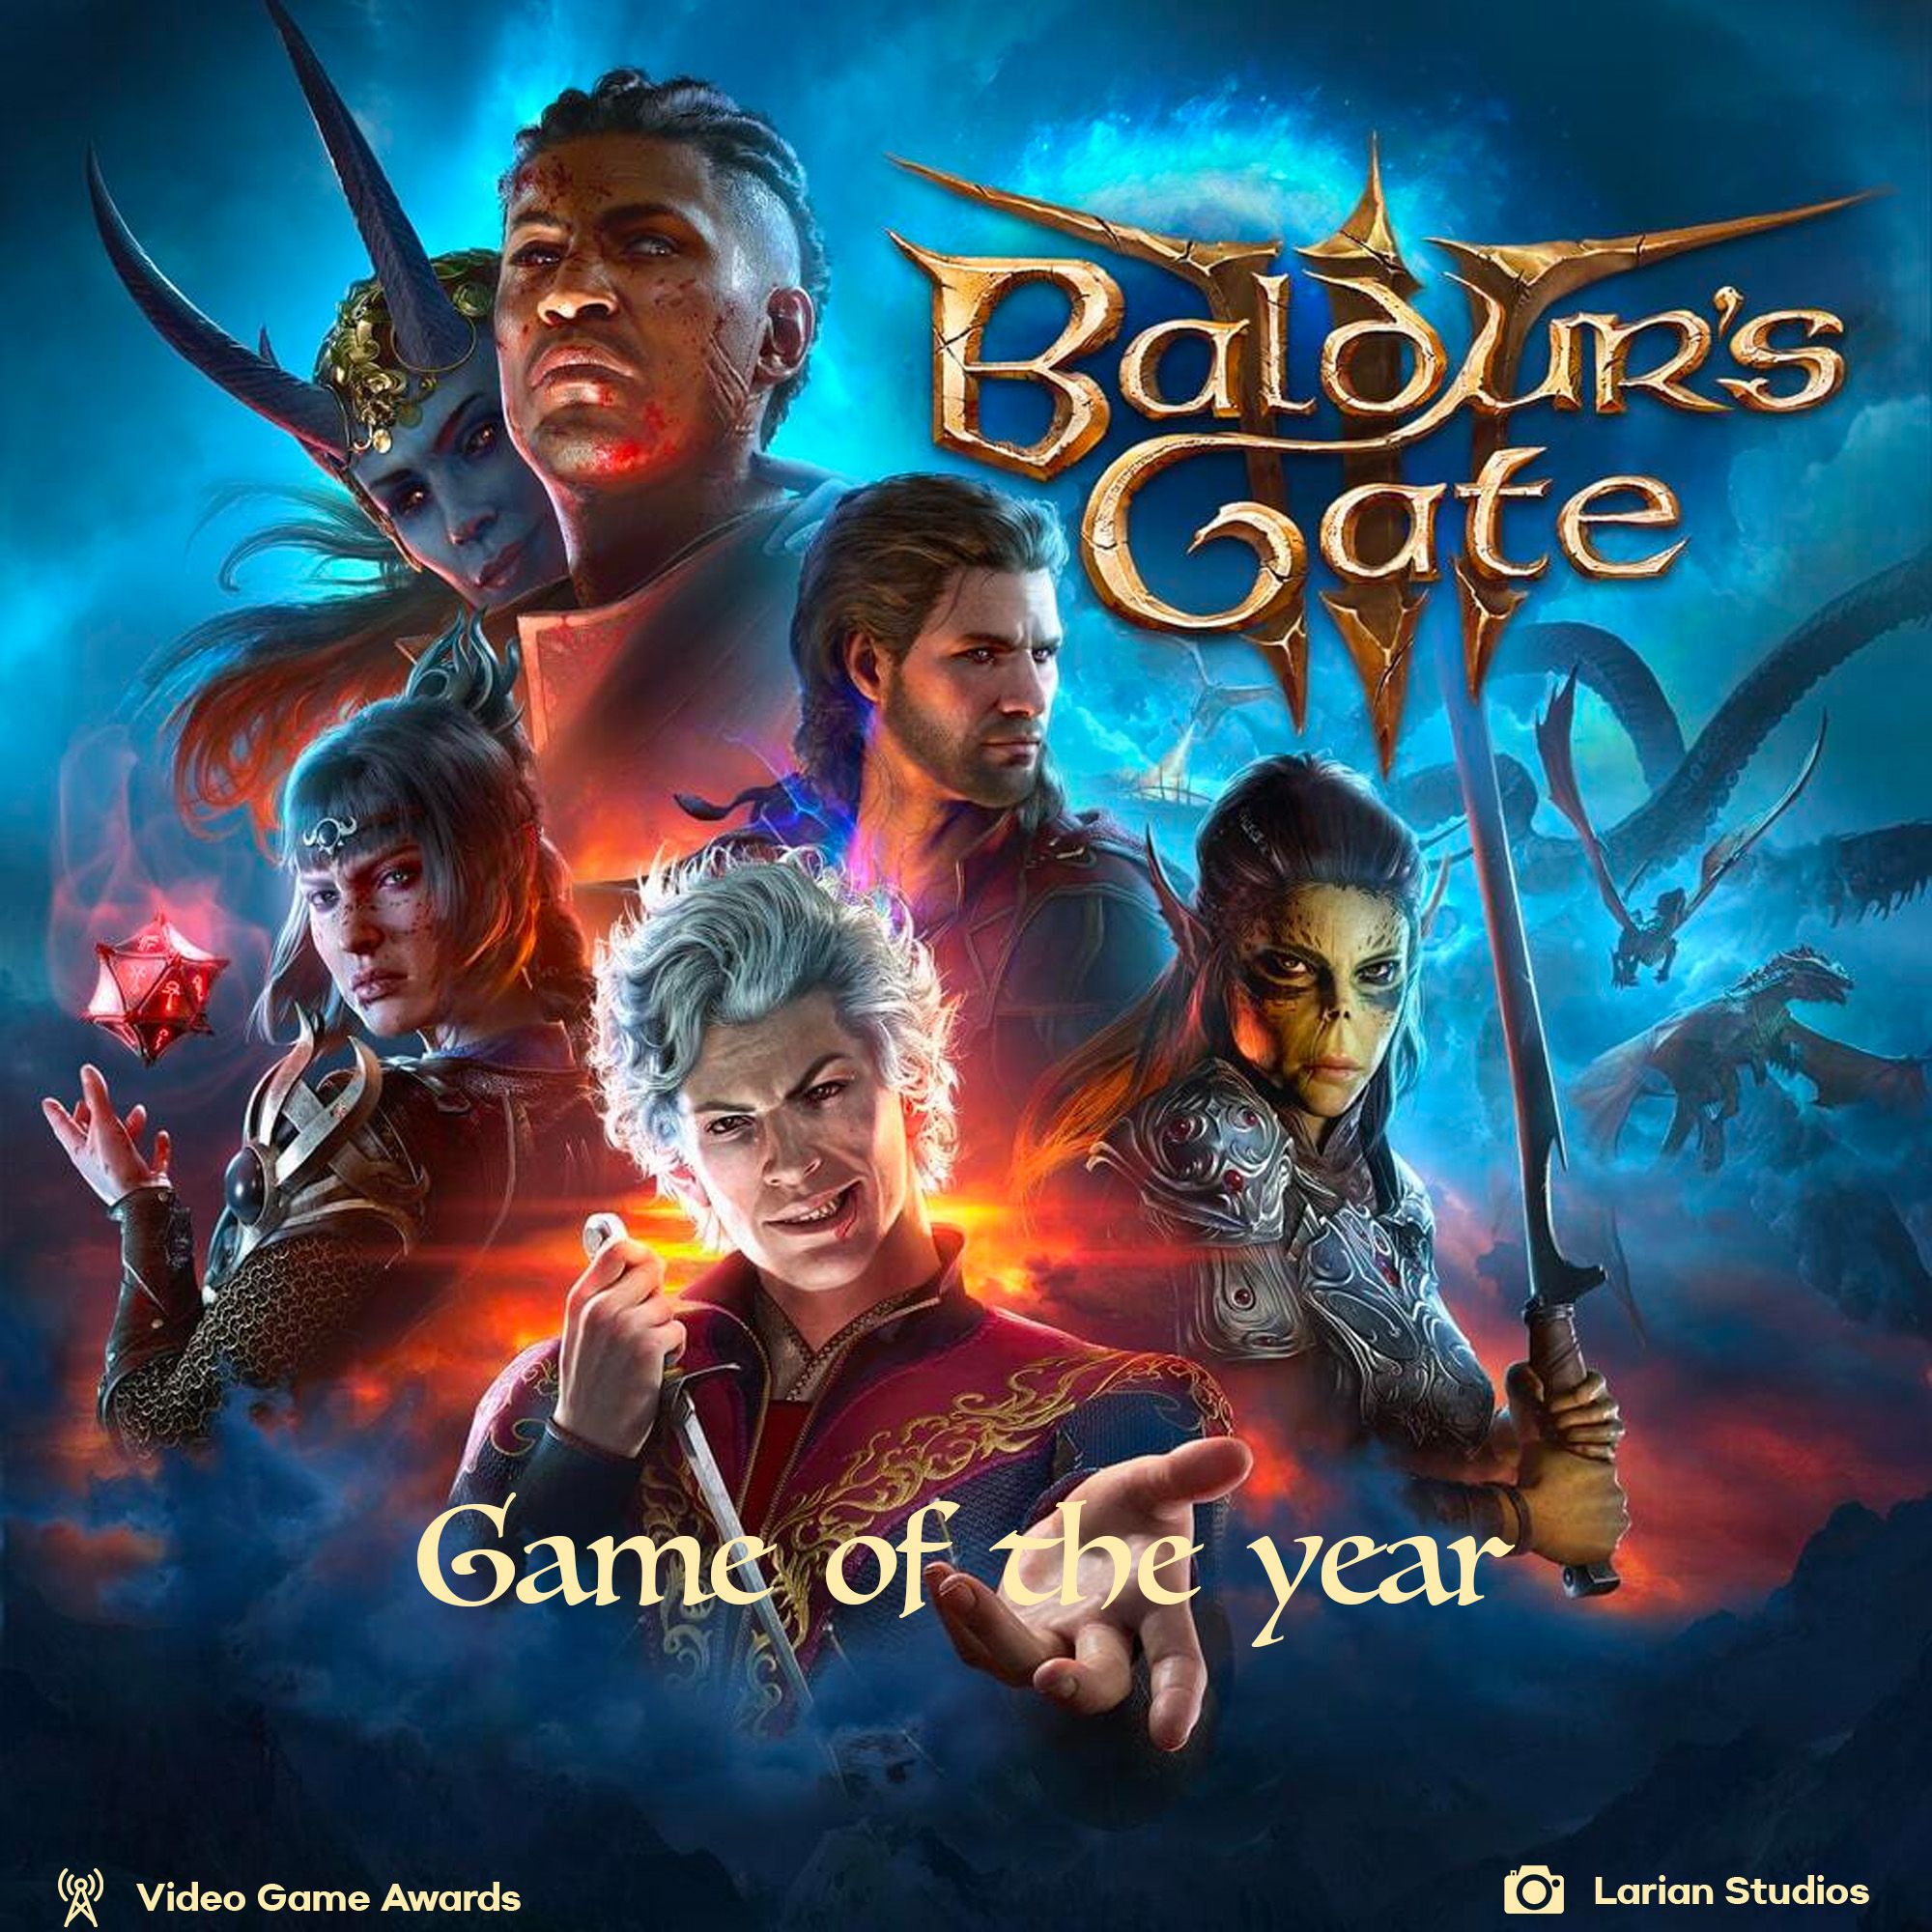 Baldur's Gate 3 is the game of the yesr